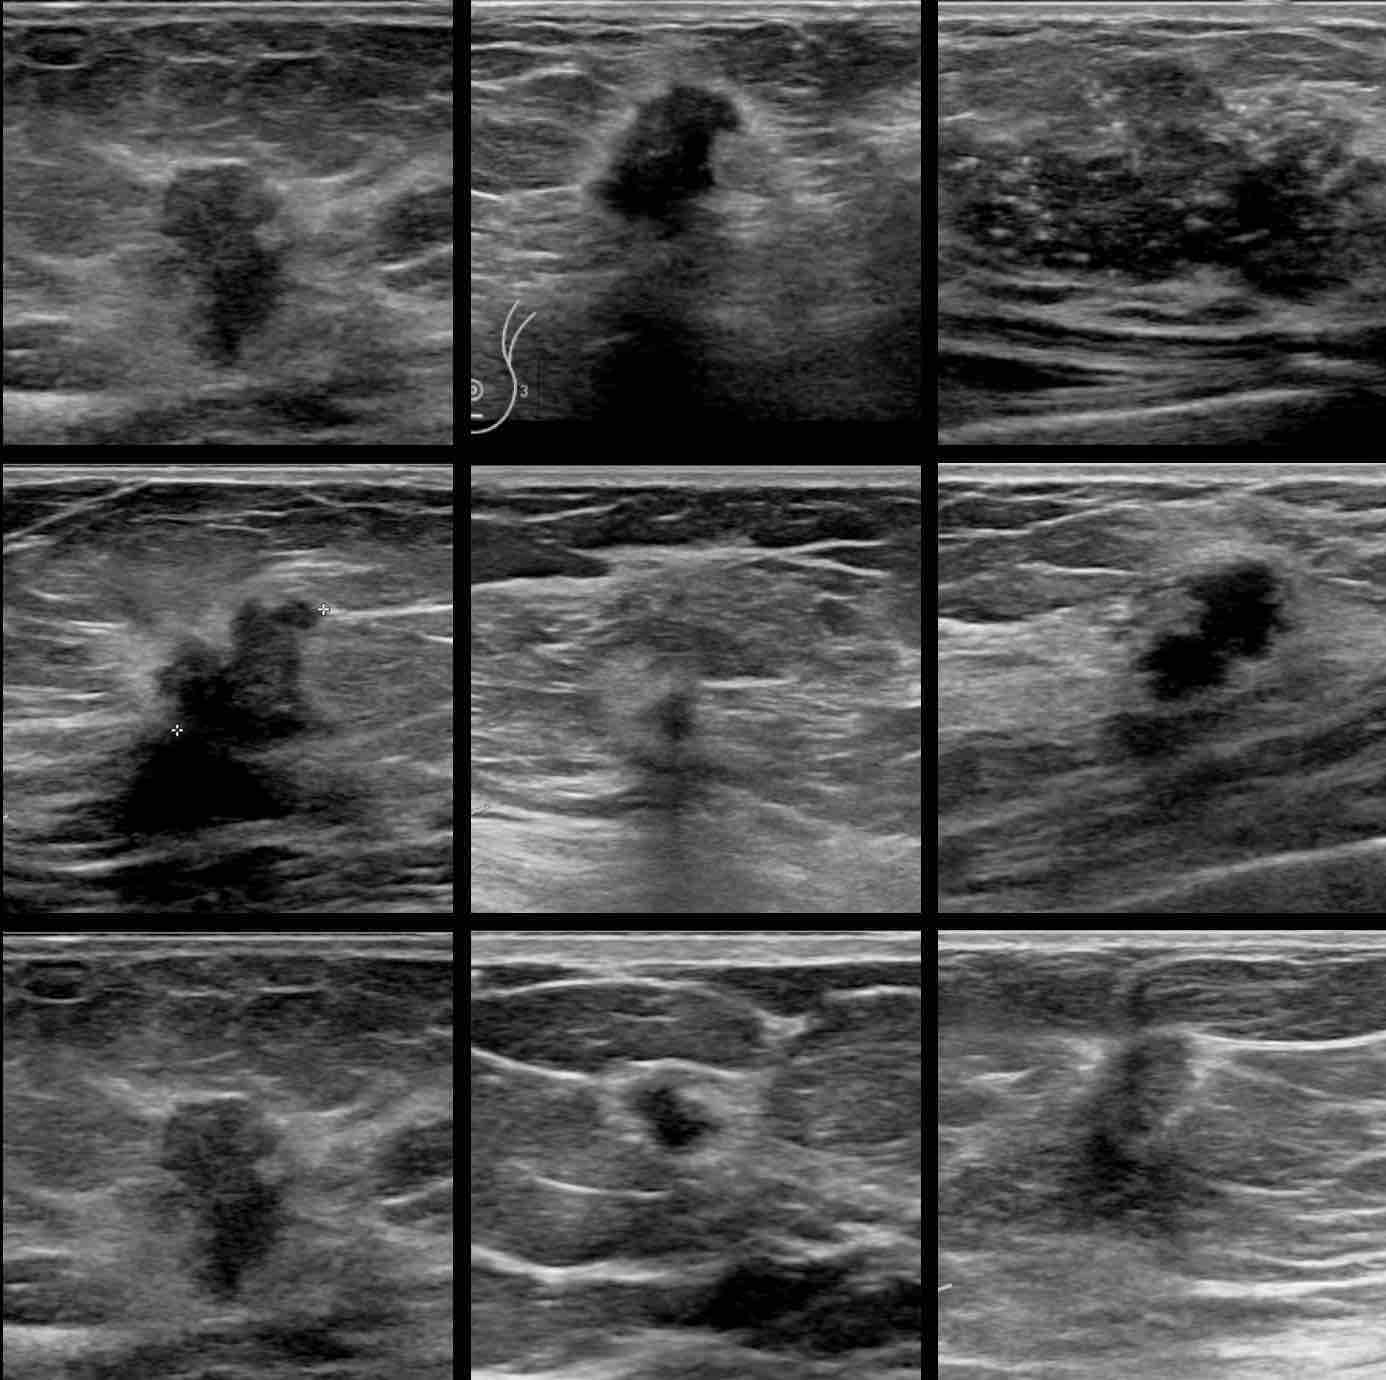 How Does Breast Cancer Look Like In Ultrasound